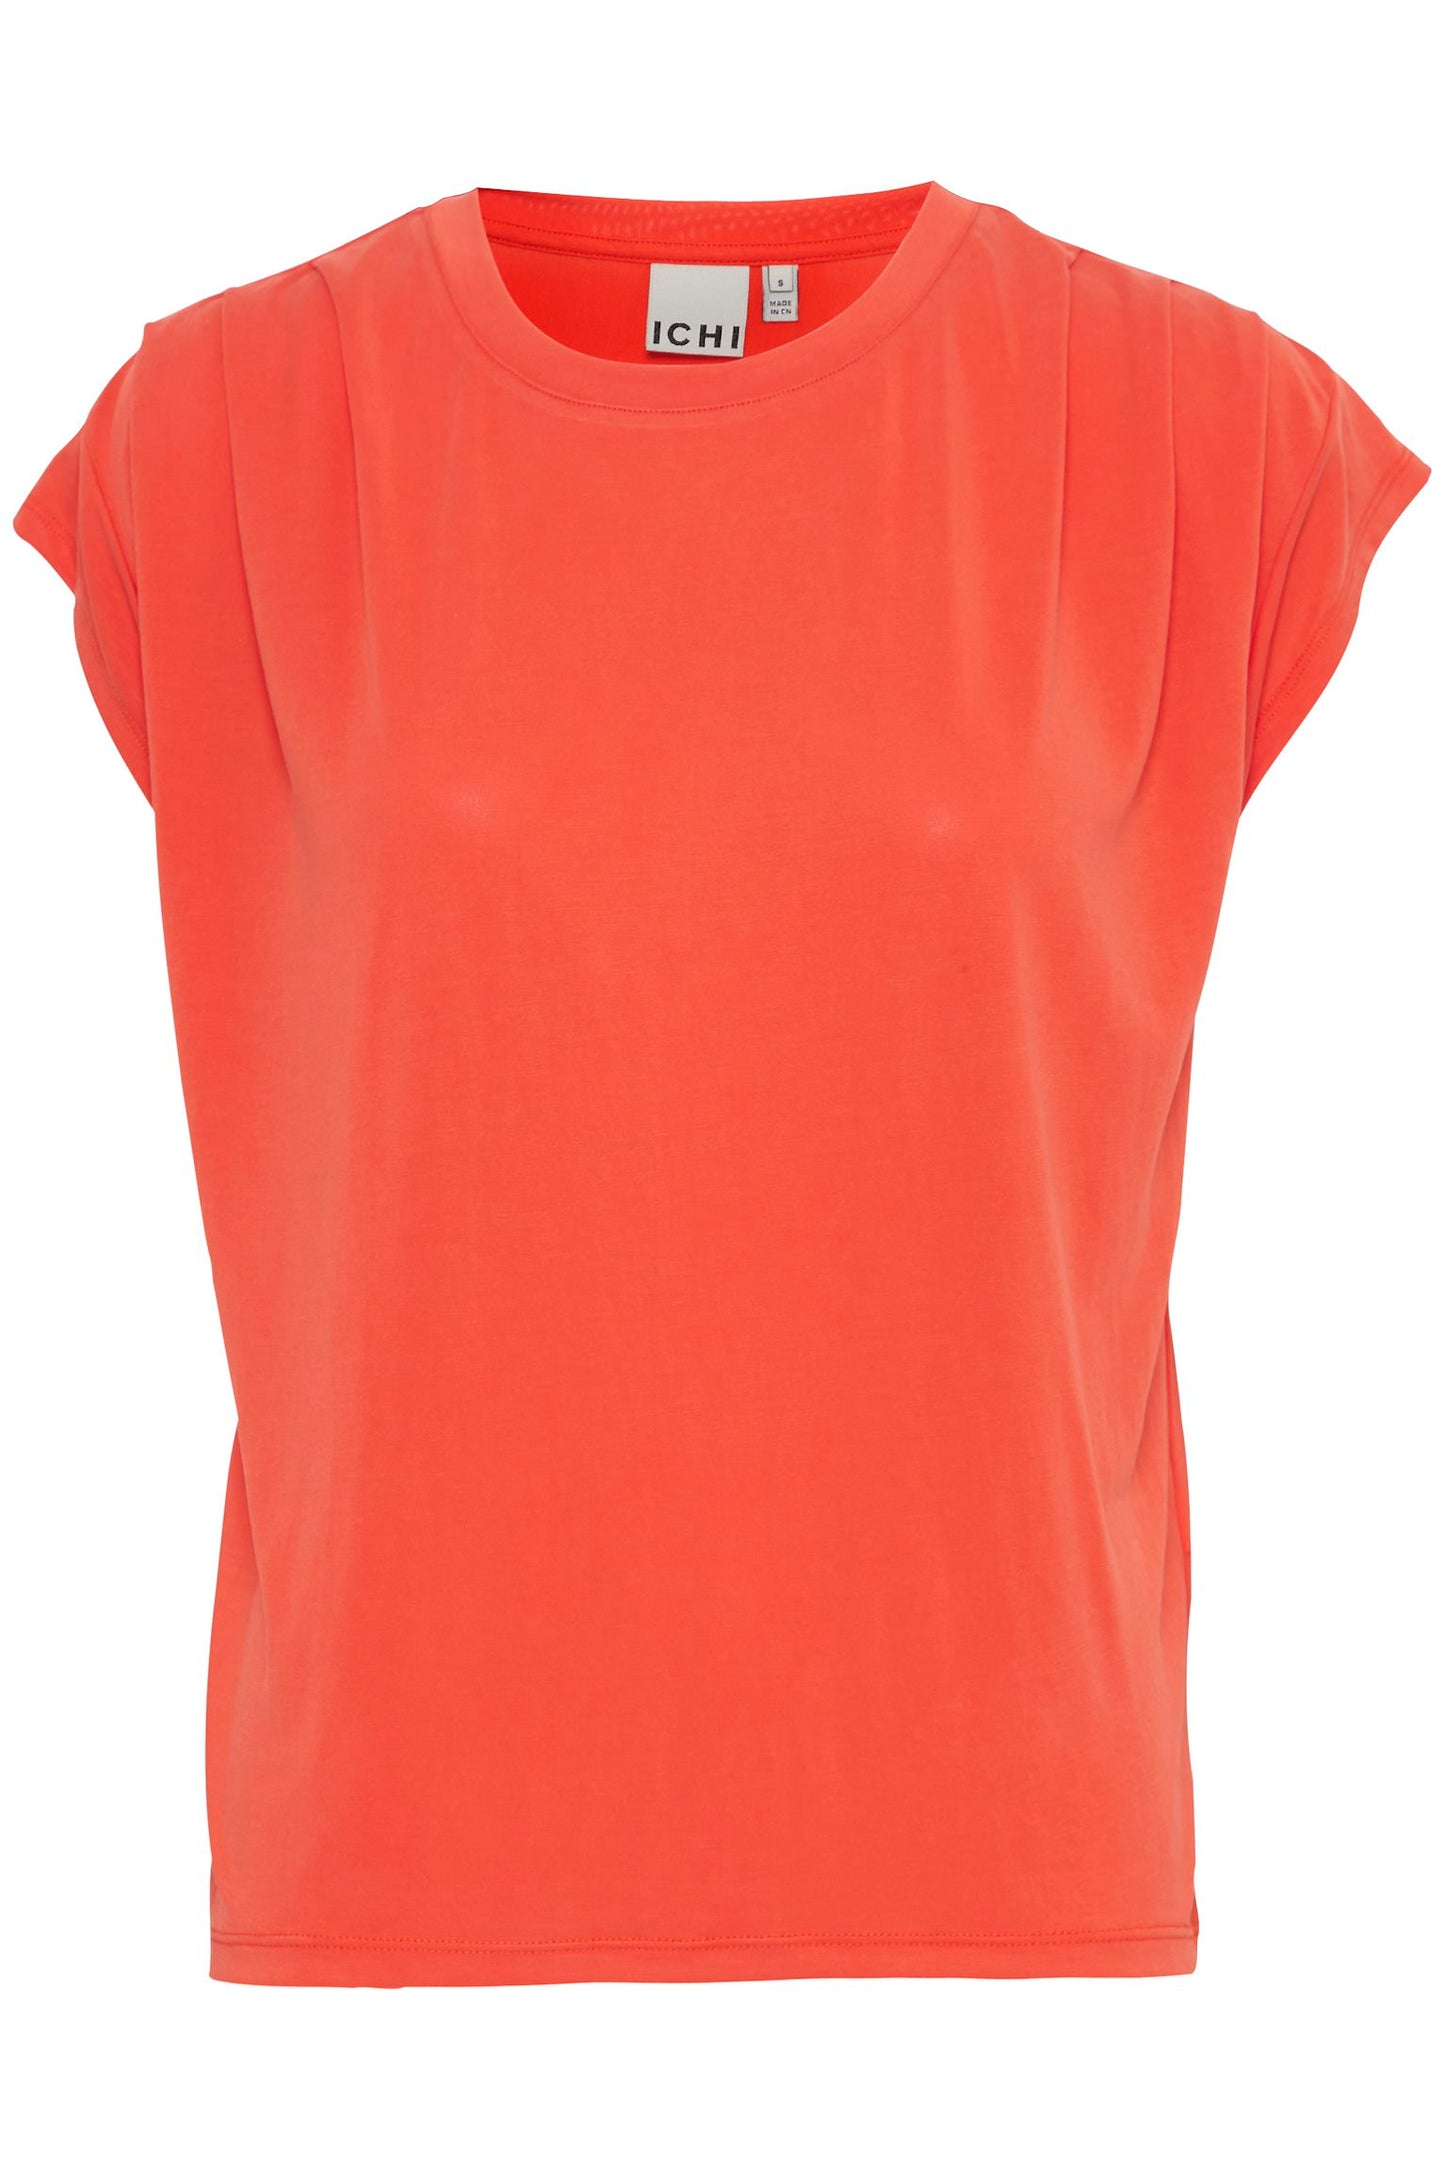 Oversized Soft T-Shirt (coral)